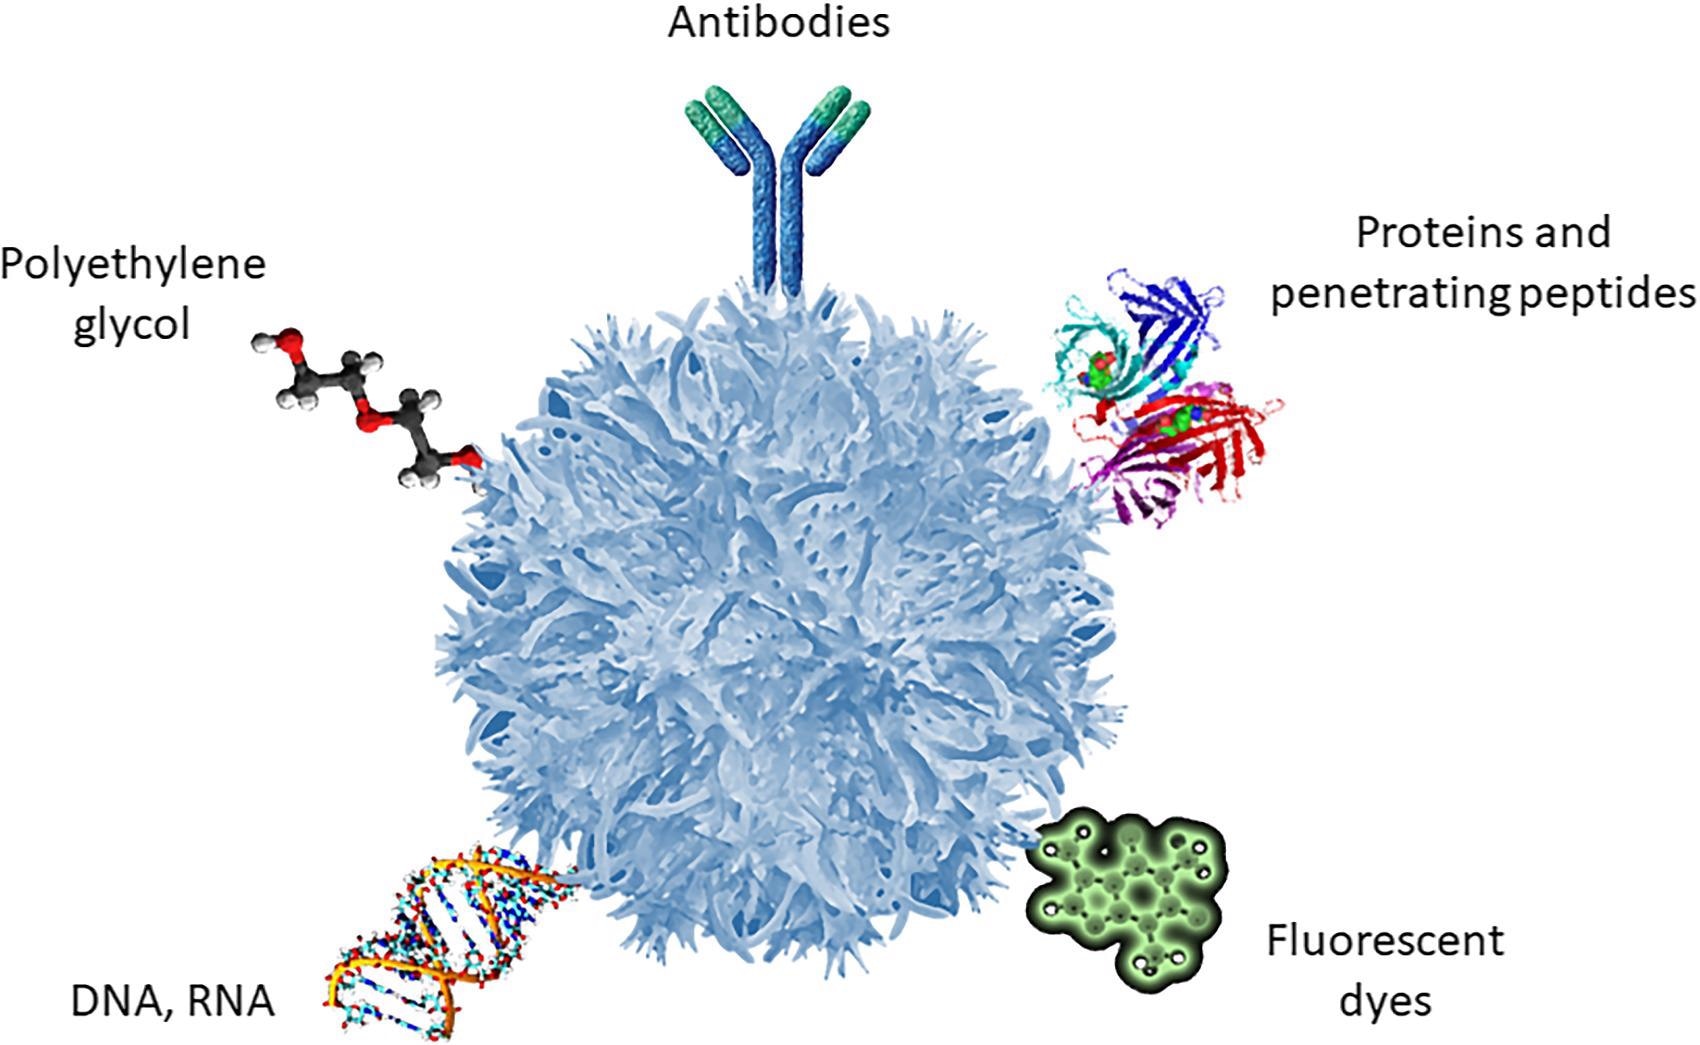 Common ligands of surface functionalization of polymeric nanoparticles